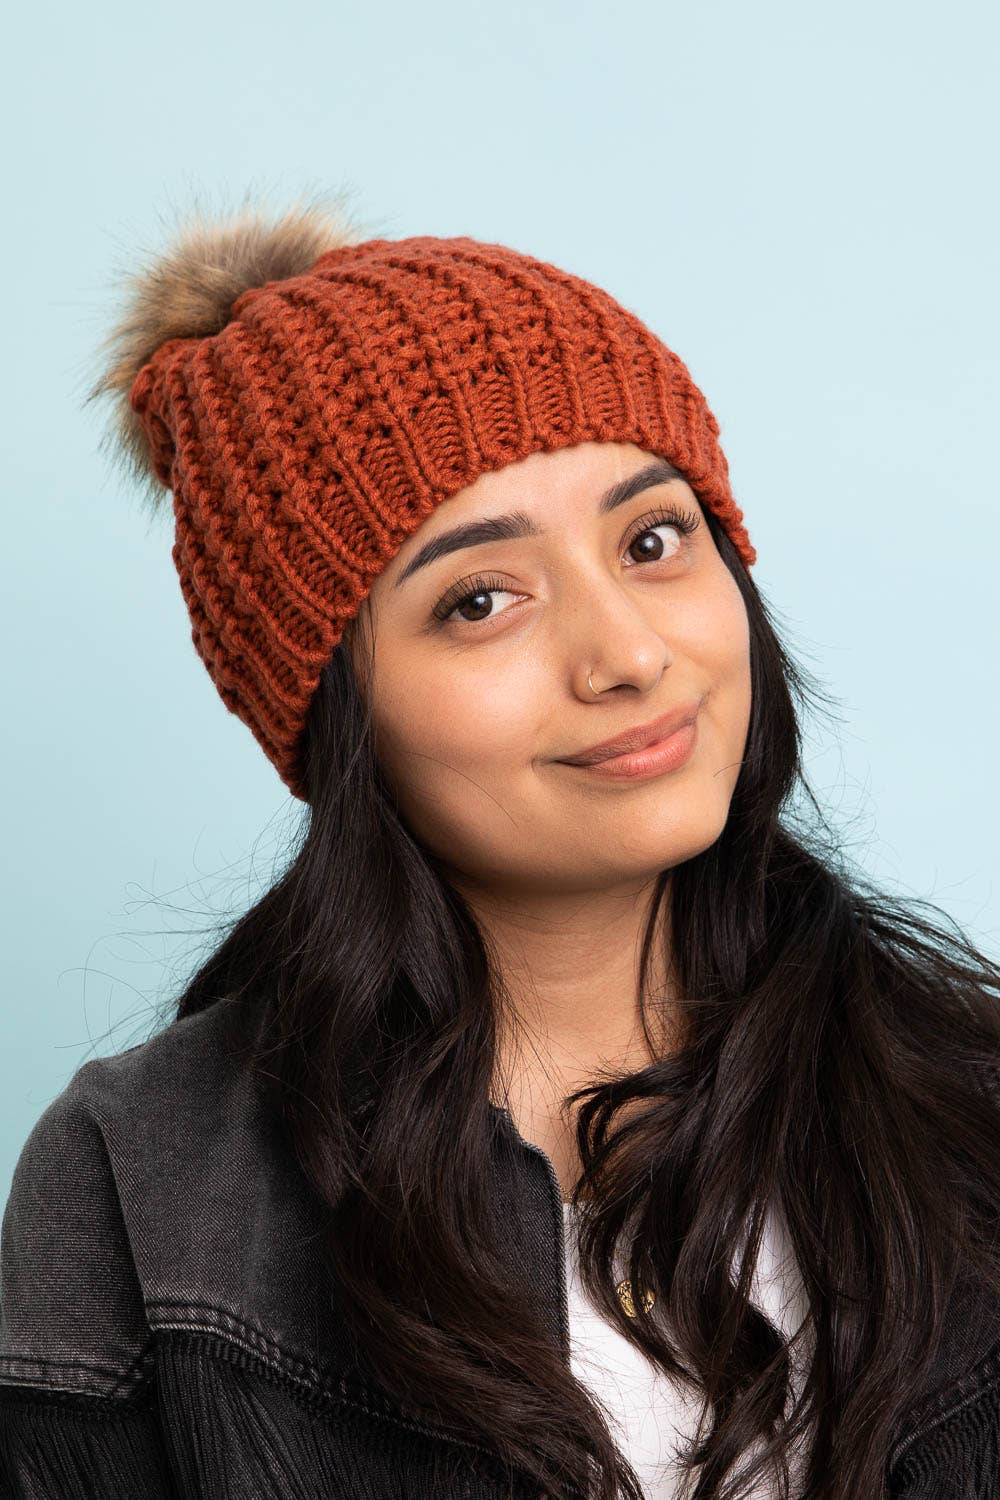 Textured Beanie With Pom Pom - Whimsical Details